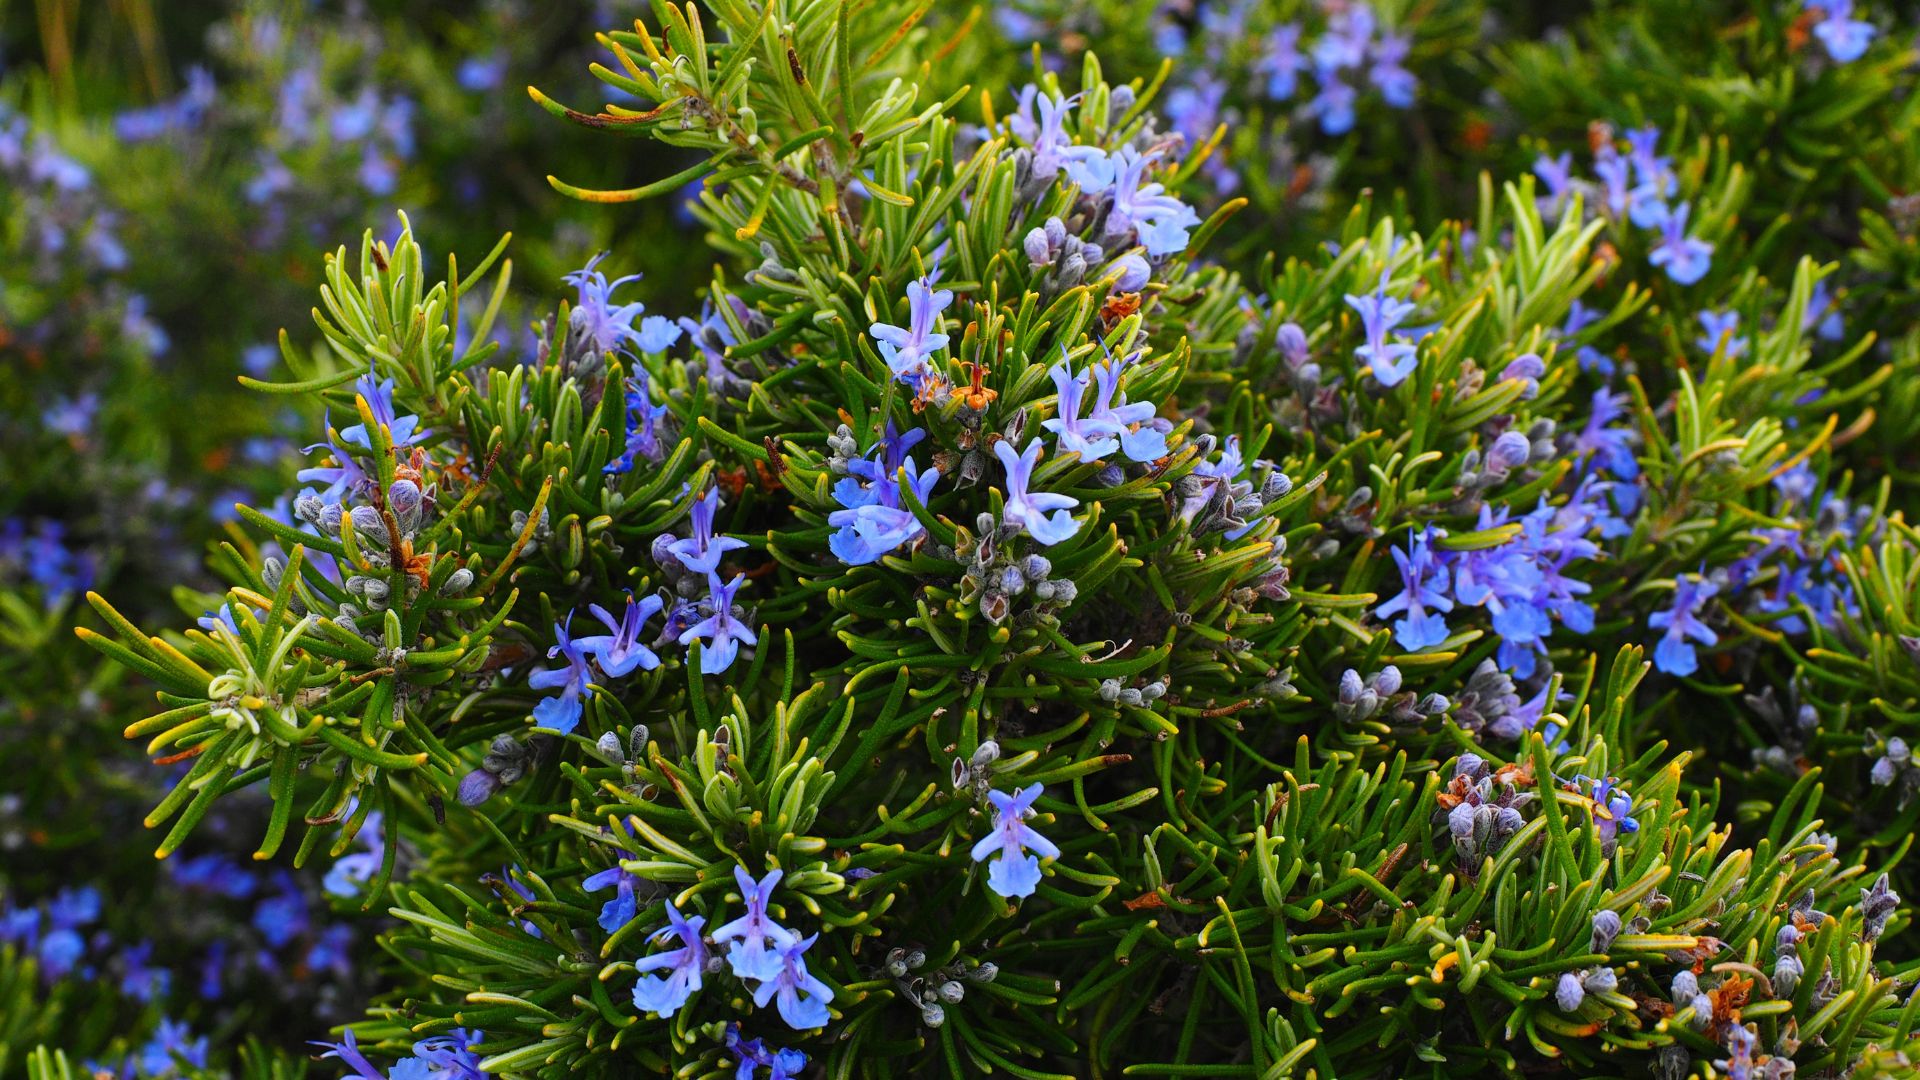 Photo of rosemary plant in bloom.